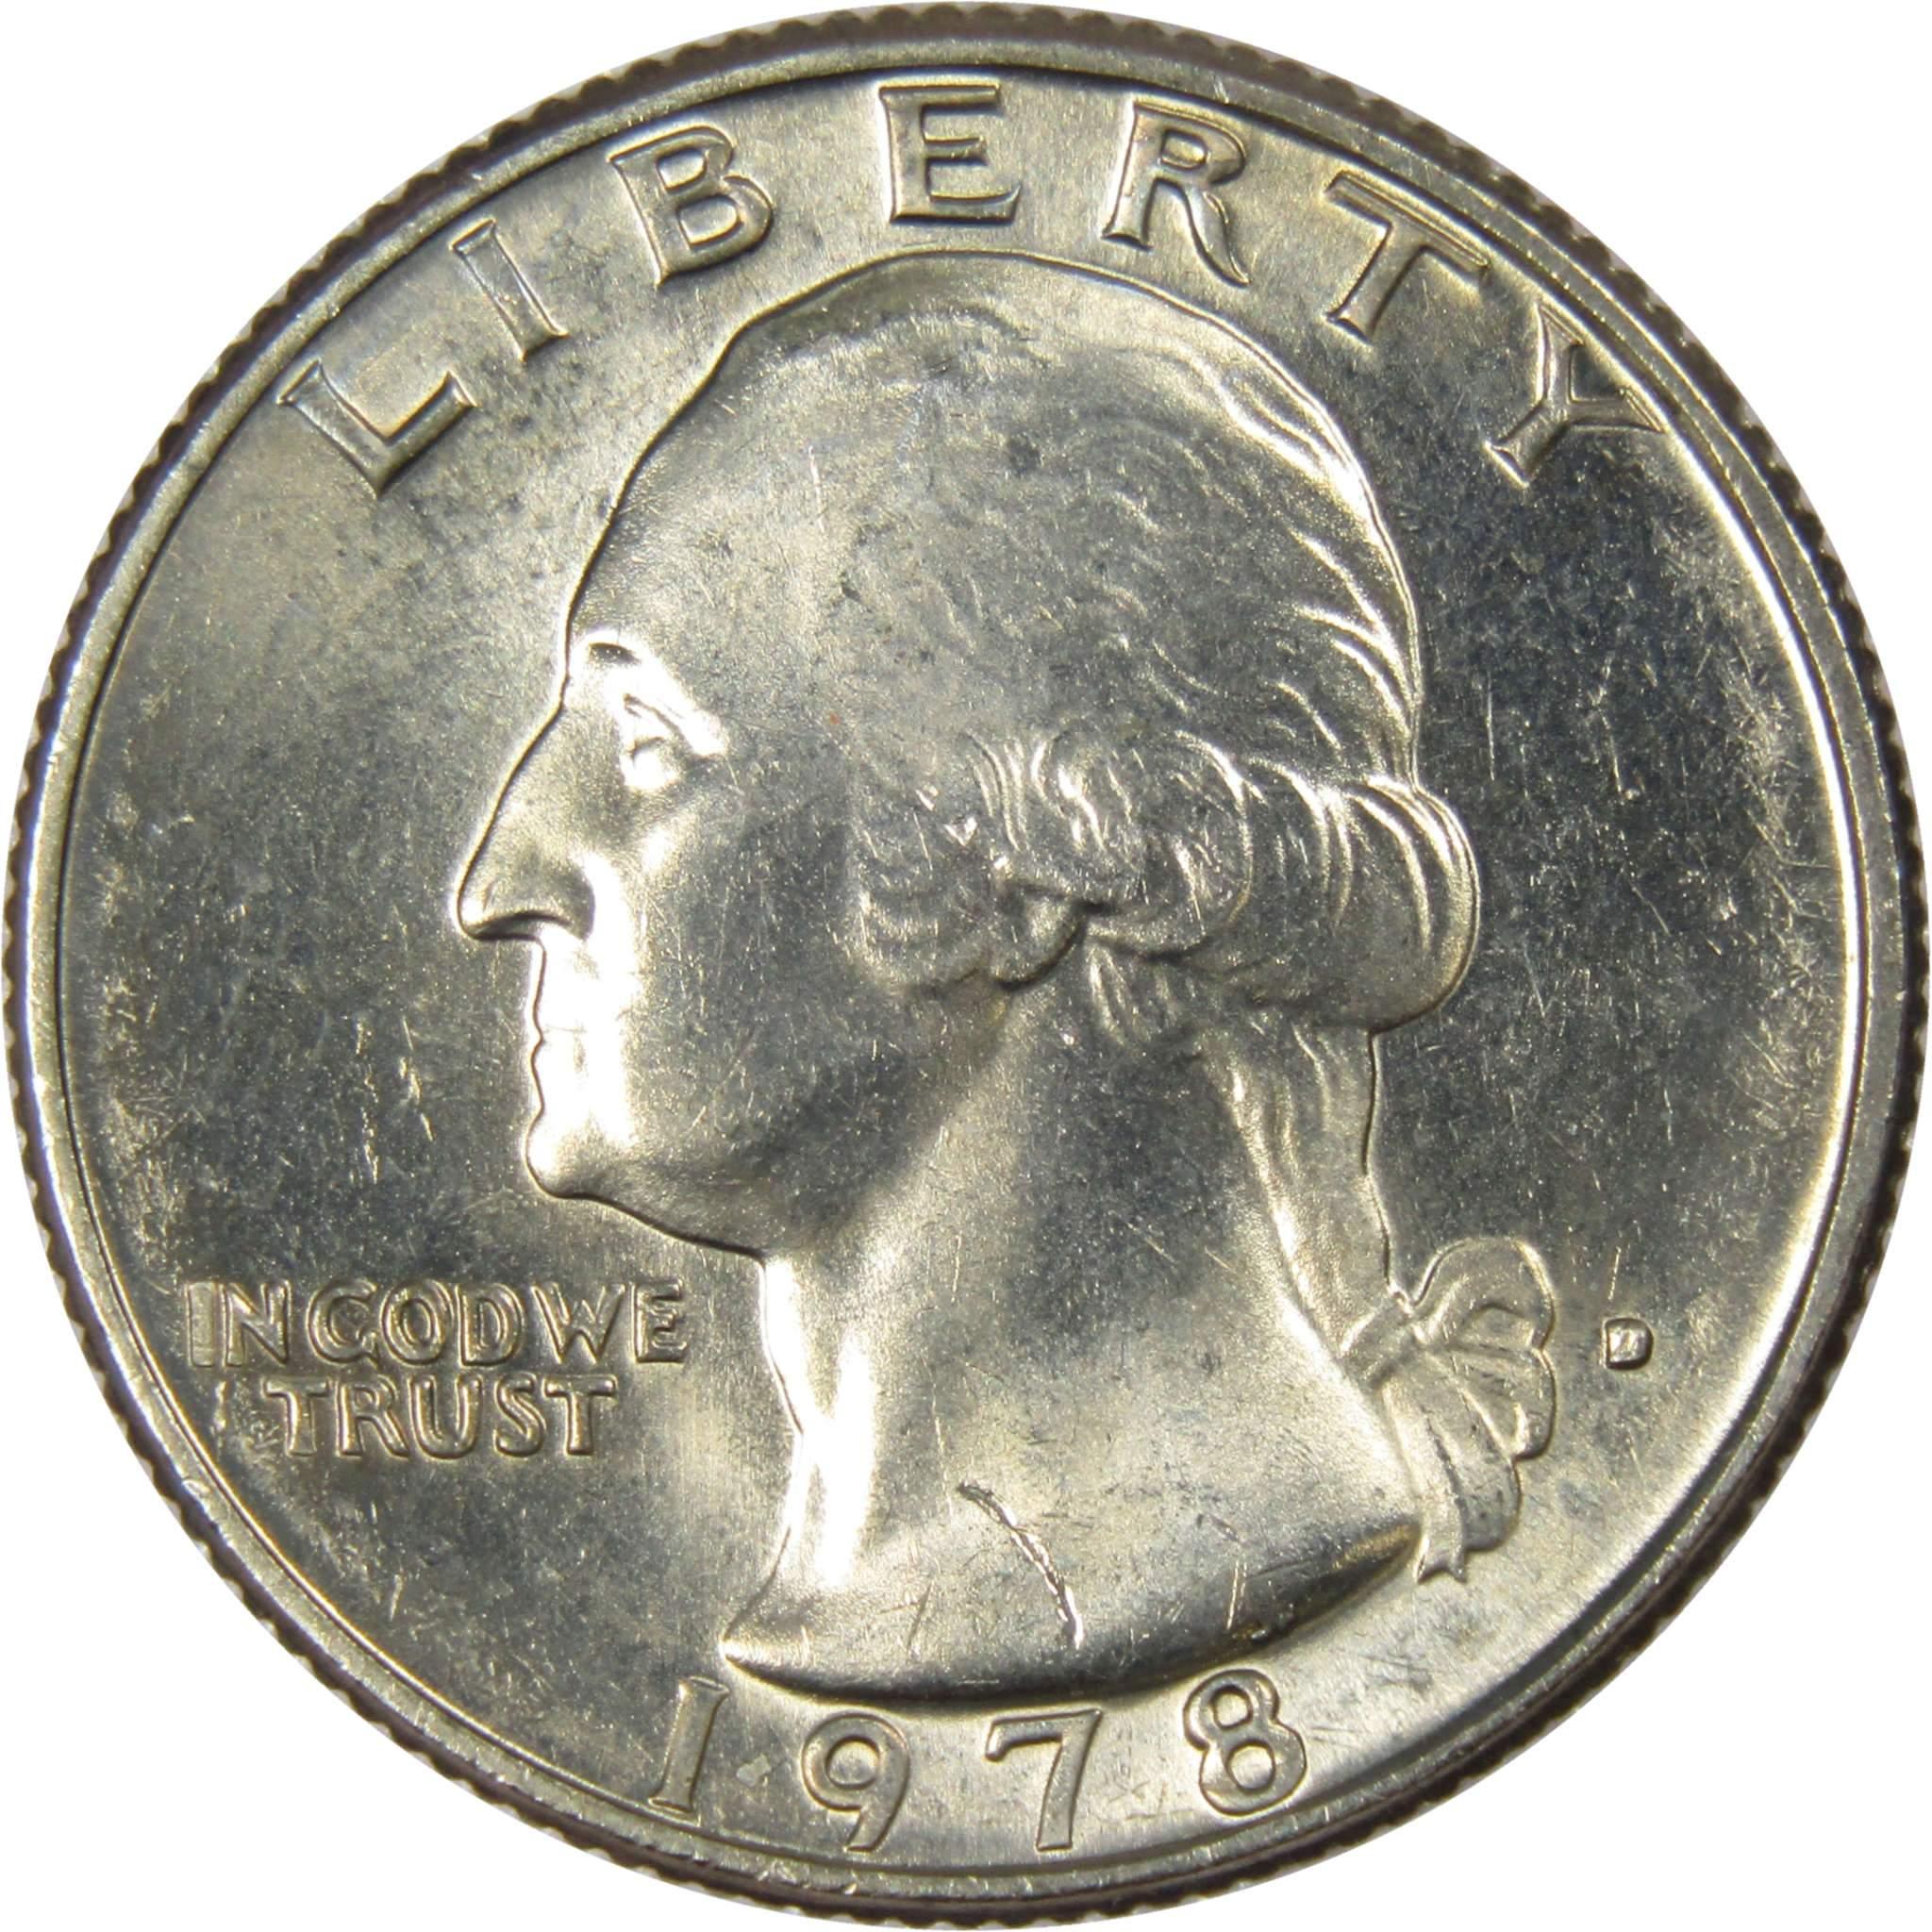 1978 D Washington Quarter BU Uncirculated Mint State 25c US Coin Collectible